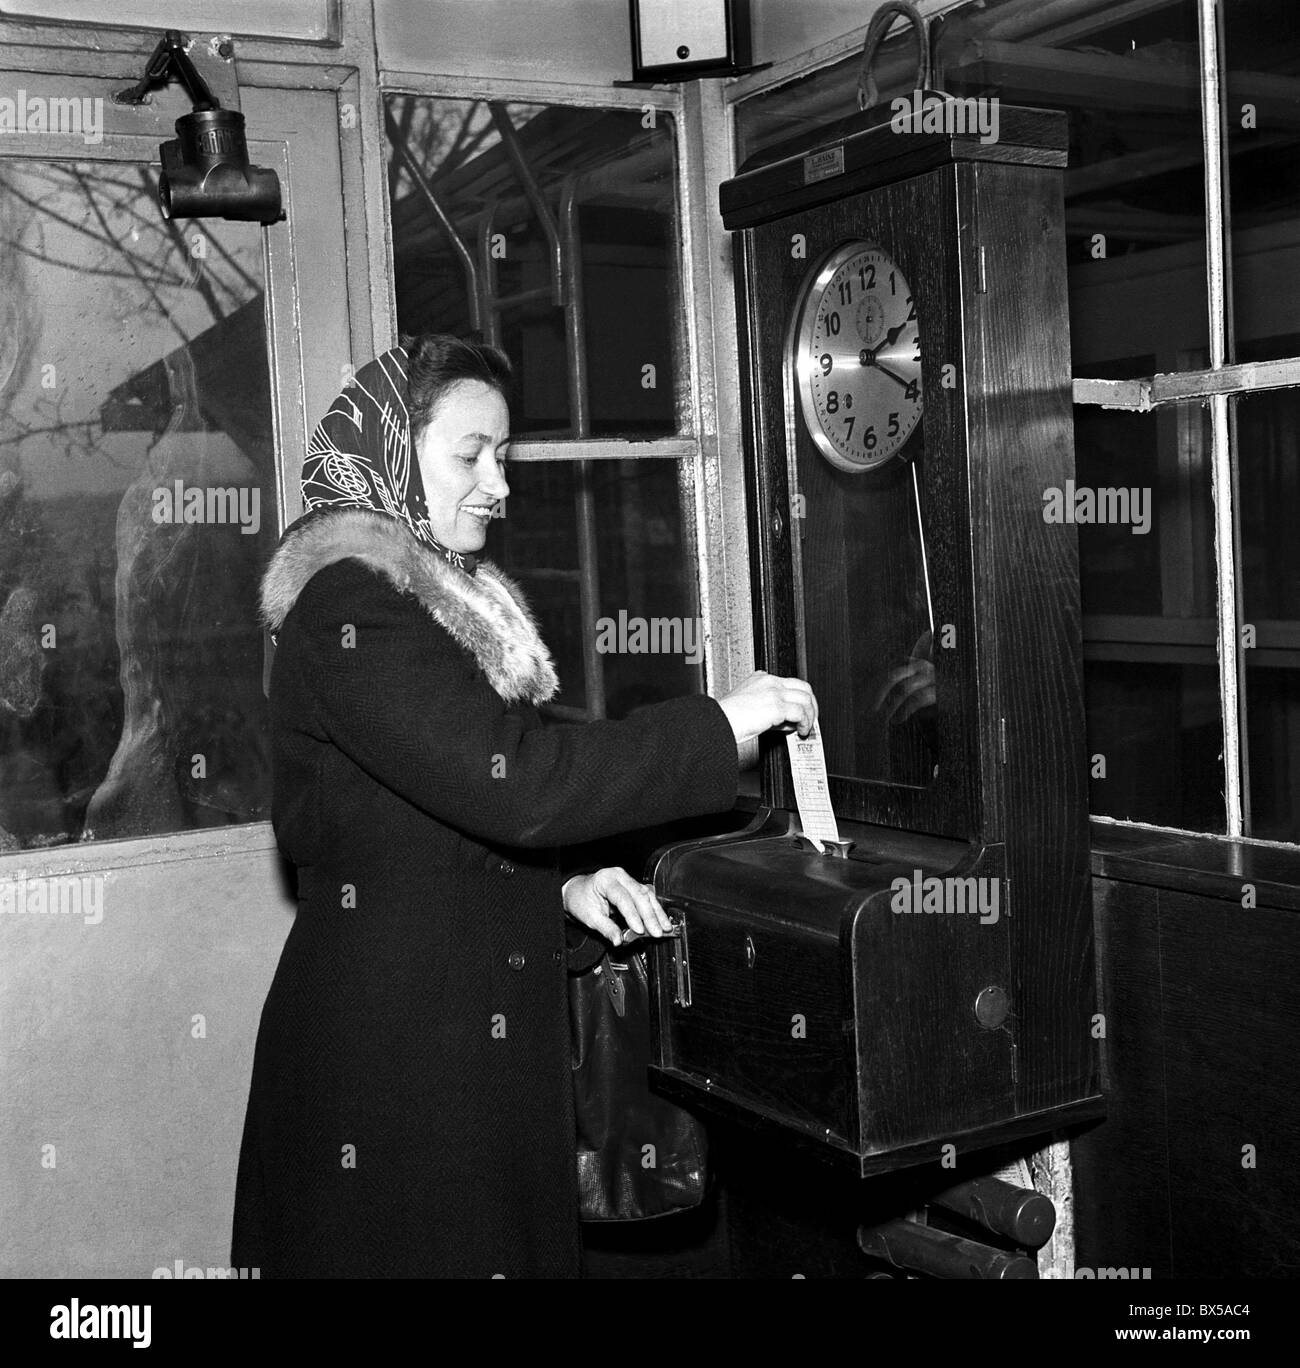 Czechoslovakia - Gottwaldov 1950. Shoe factory worker checks in and marks her time card at Svit shoe making factory. This plant Stock Photo